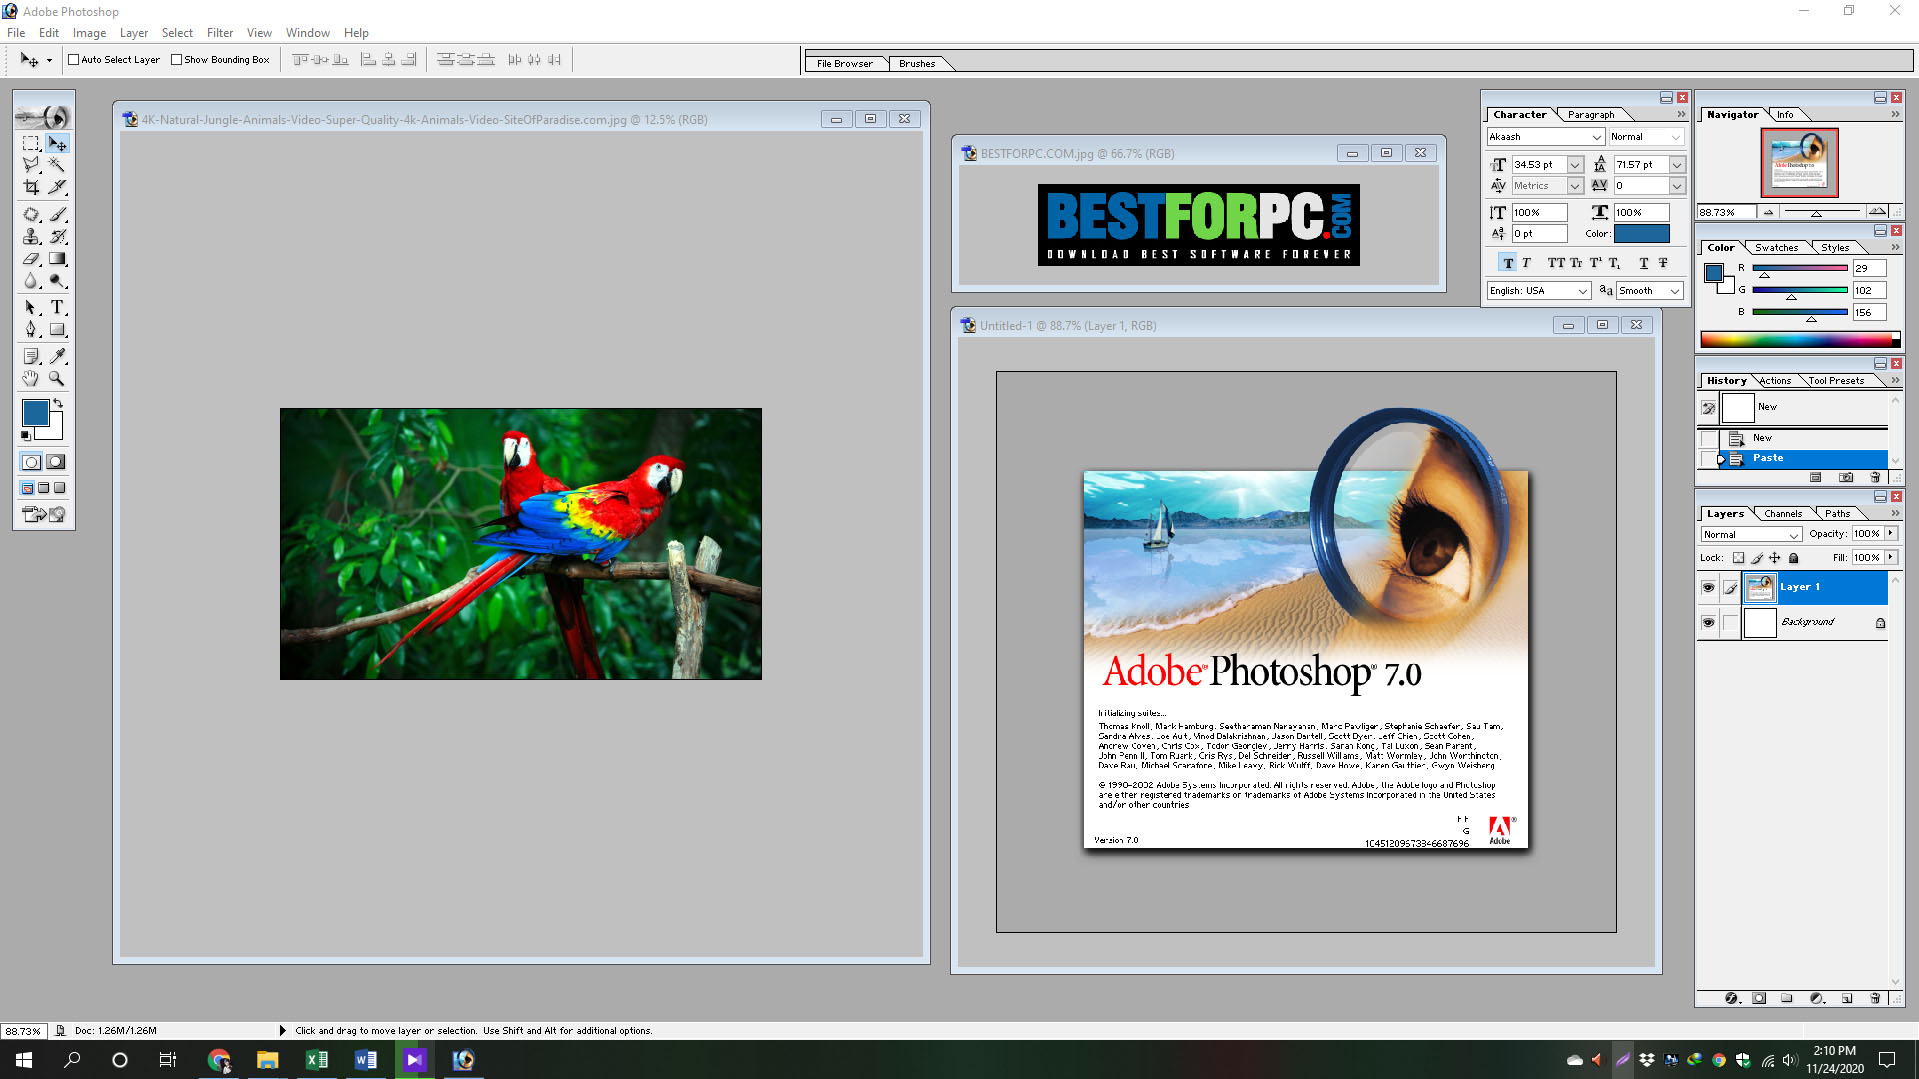 adobe photoshop 7.0 software download for windows 8